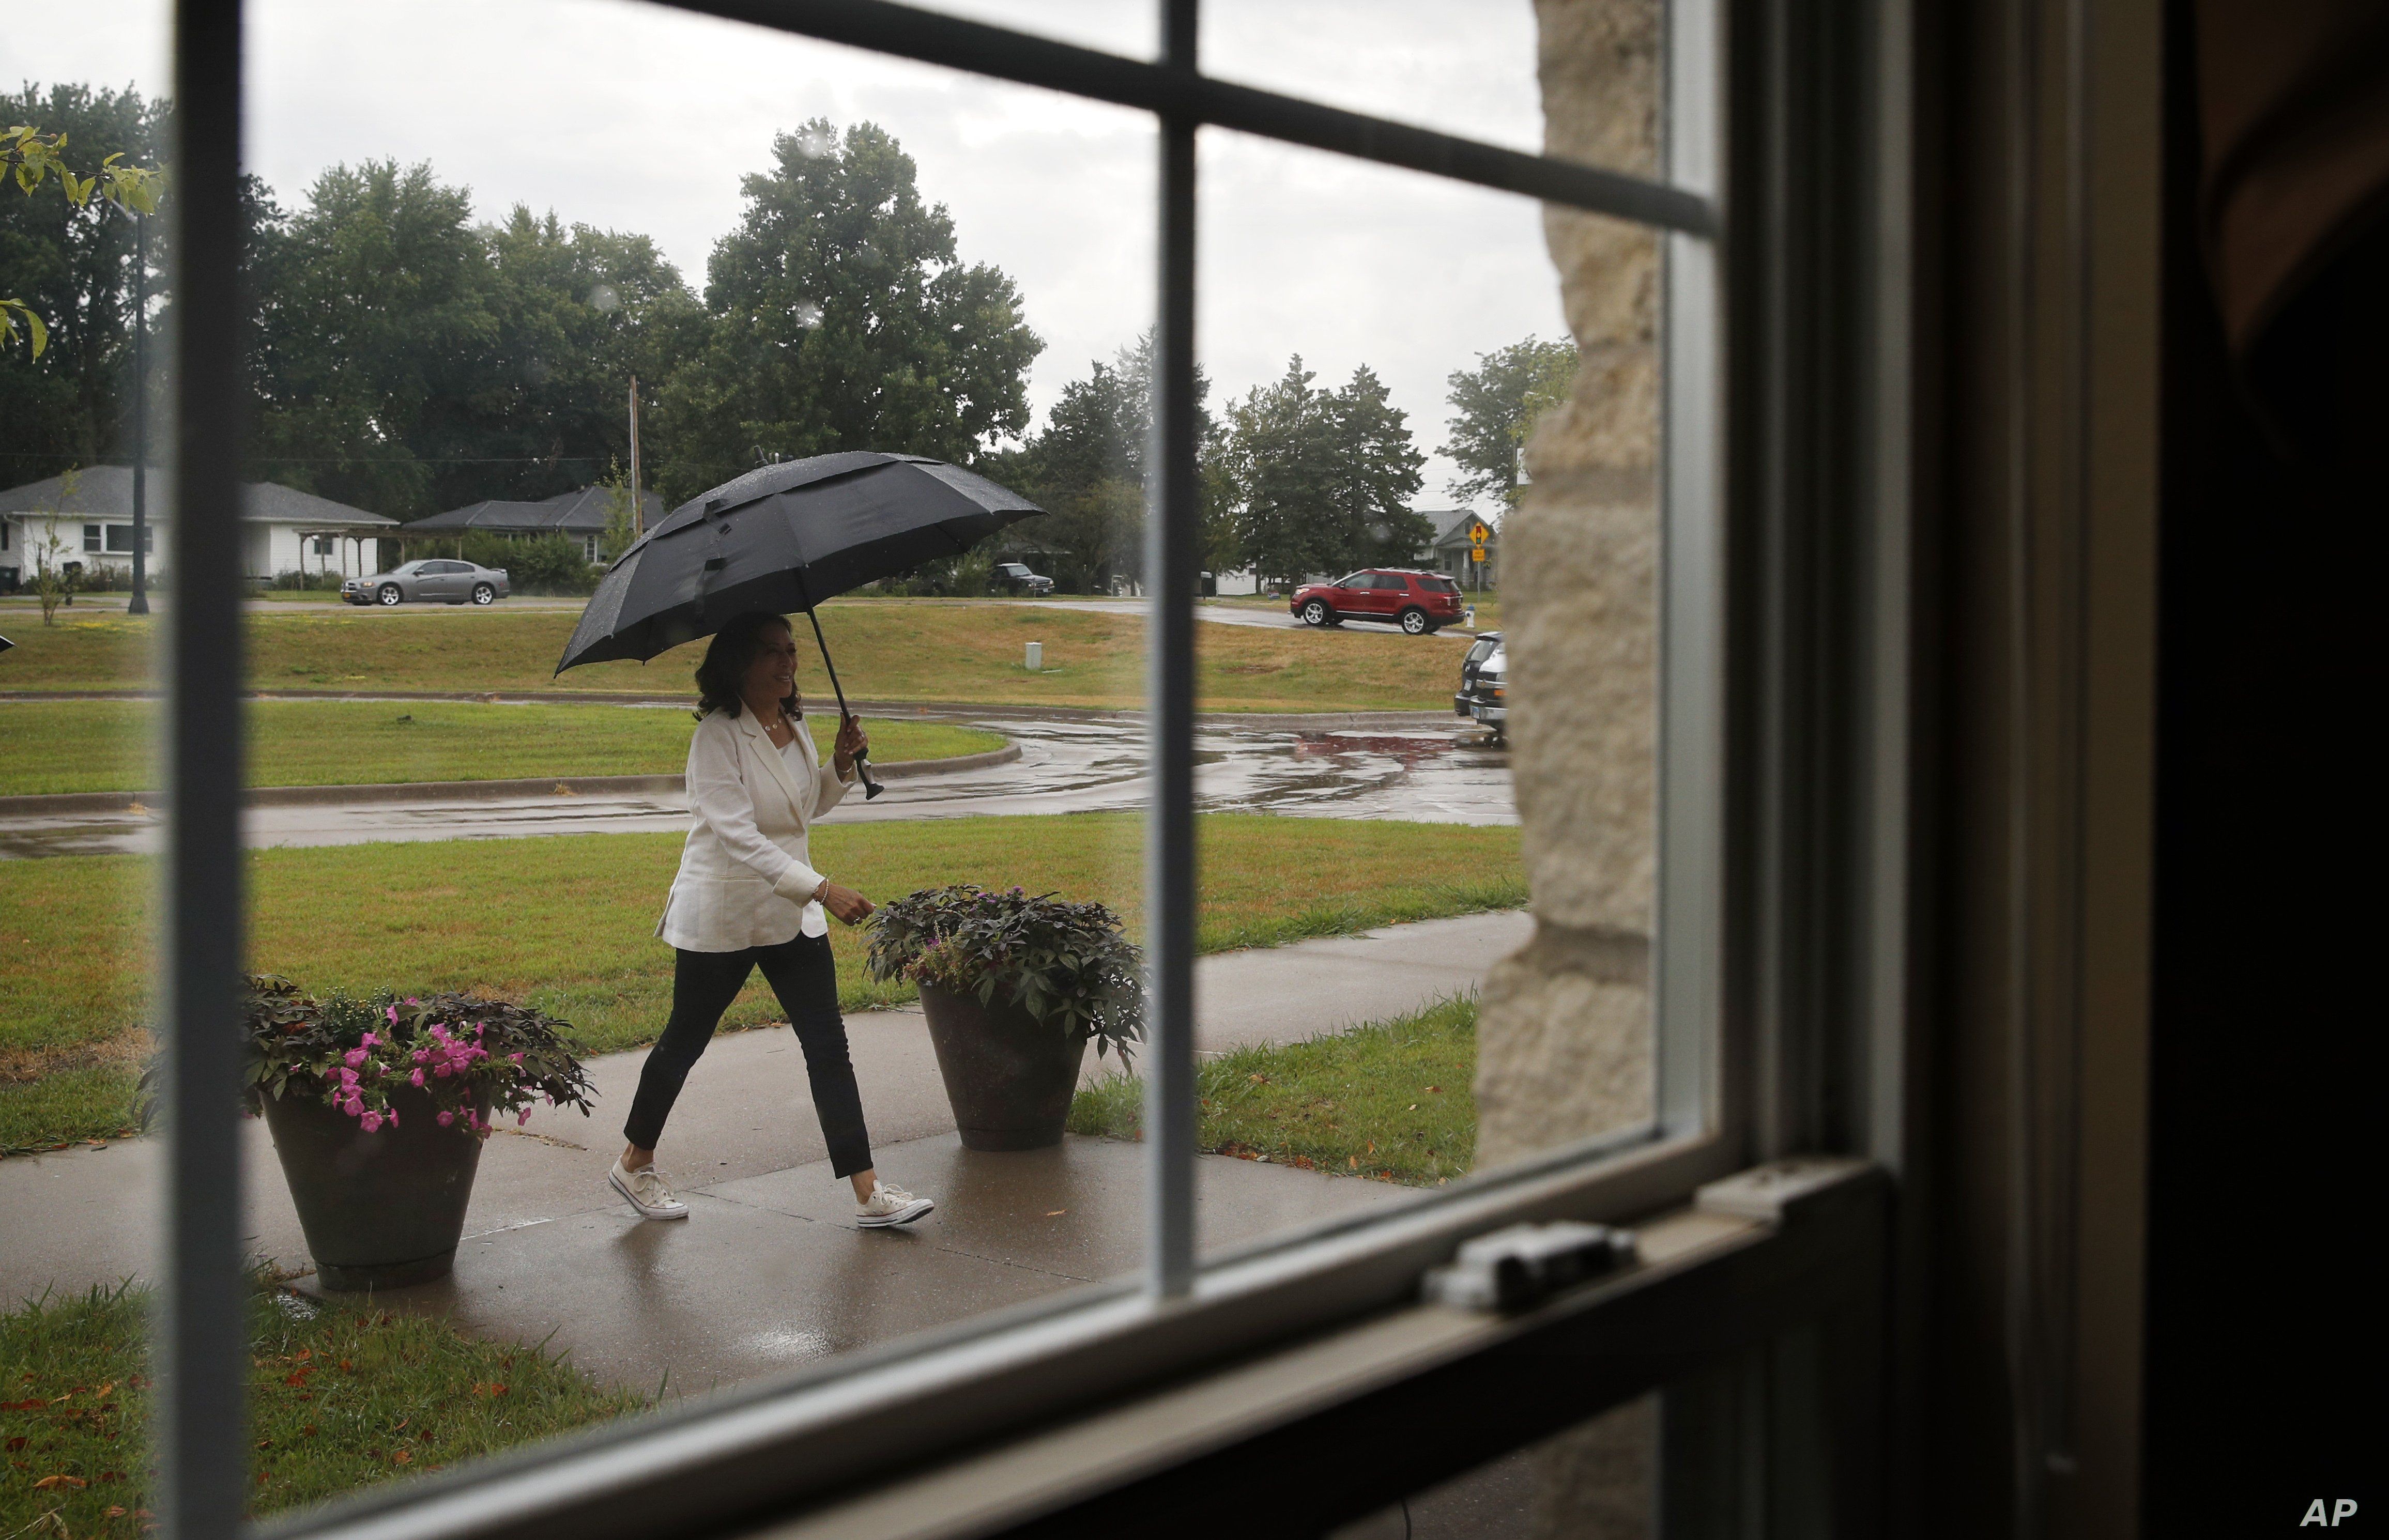 Democratic presidential candidate Sen. Kamala Harris, D-Calif., arrives for a visit at the Bickford Senior Living Center, Aug. 12, 2019, in Muscatine, Iowa.